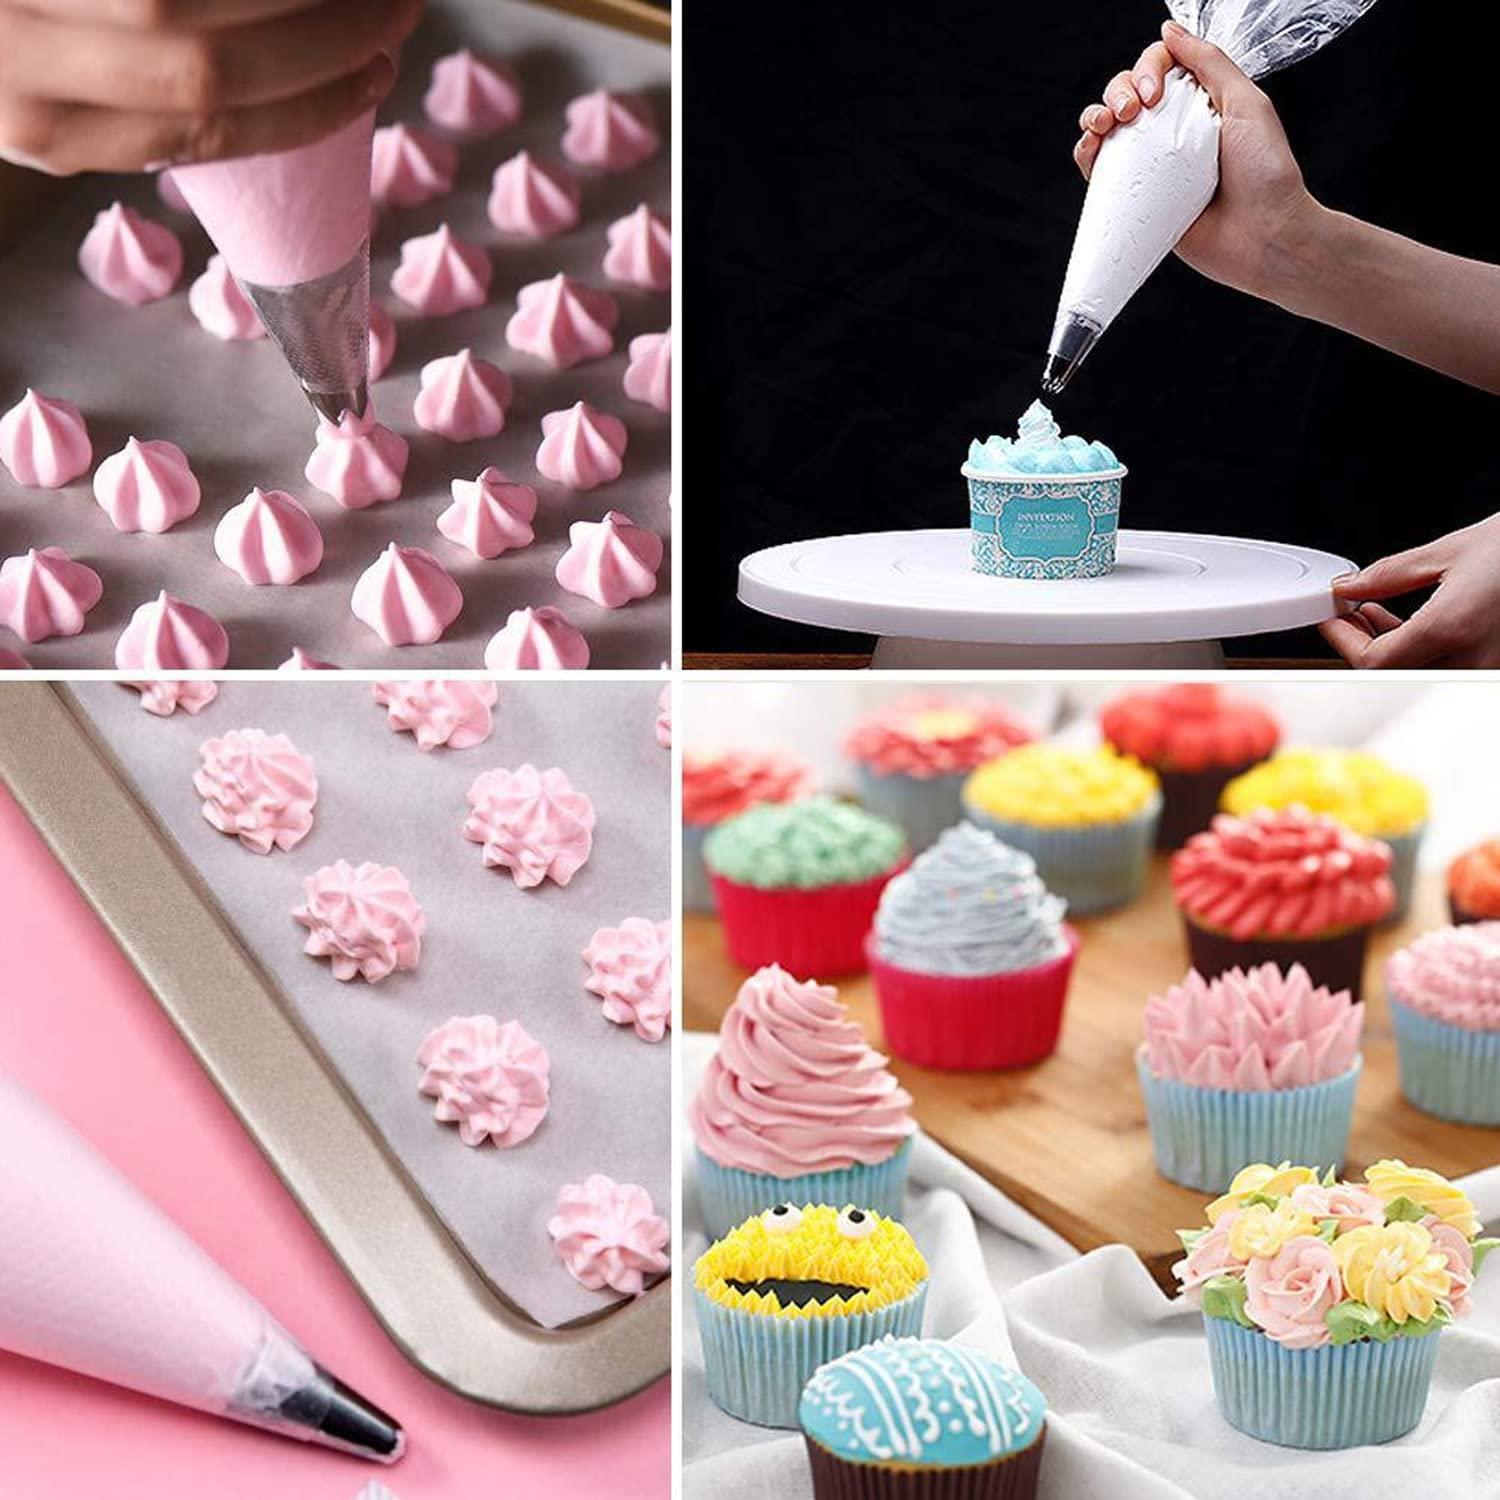 105 Pcs Cake Decorating Kit Supplies Tool with 50 Disposable Pastry Bags,48 Numbered Icing Tips,1 Pcs Reusable piping bag, Cake Decorating Tool Set for Cake Cupcake Baking Lover DIY Beginners - CookCave